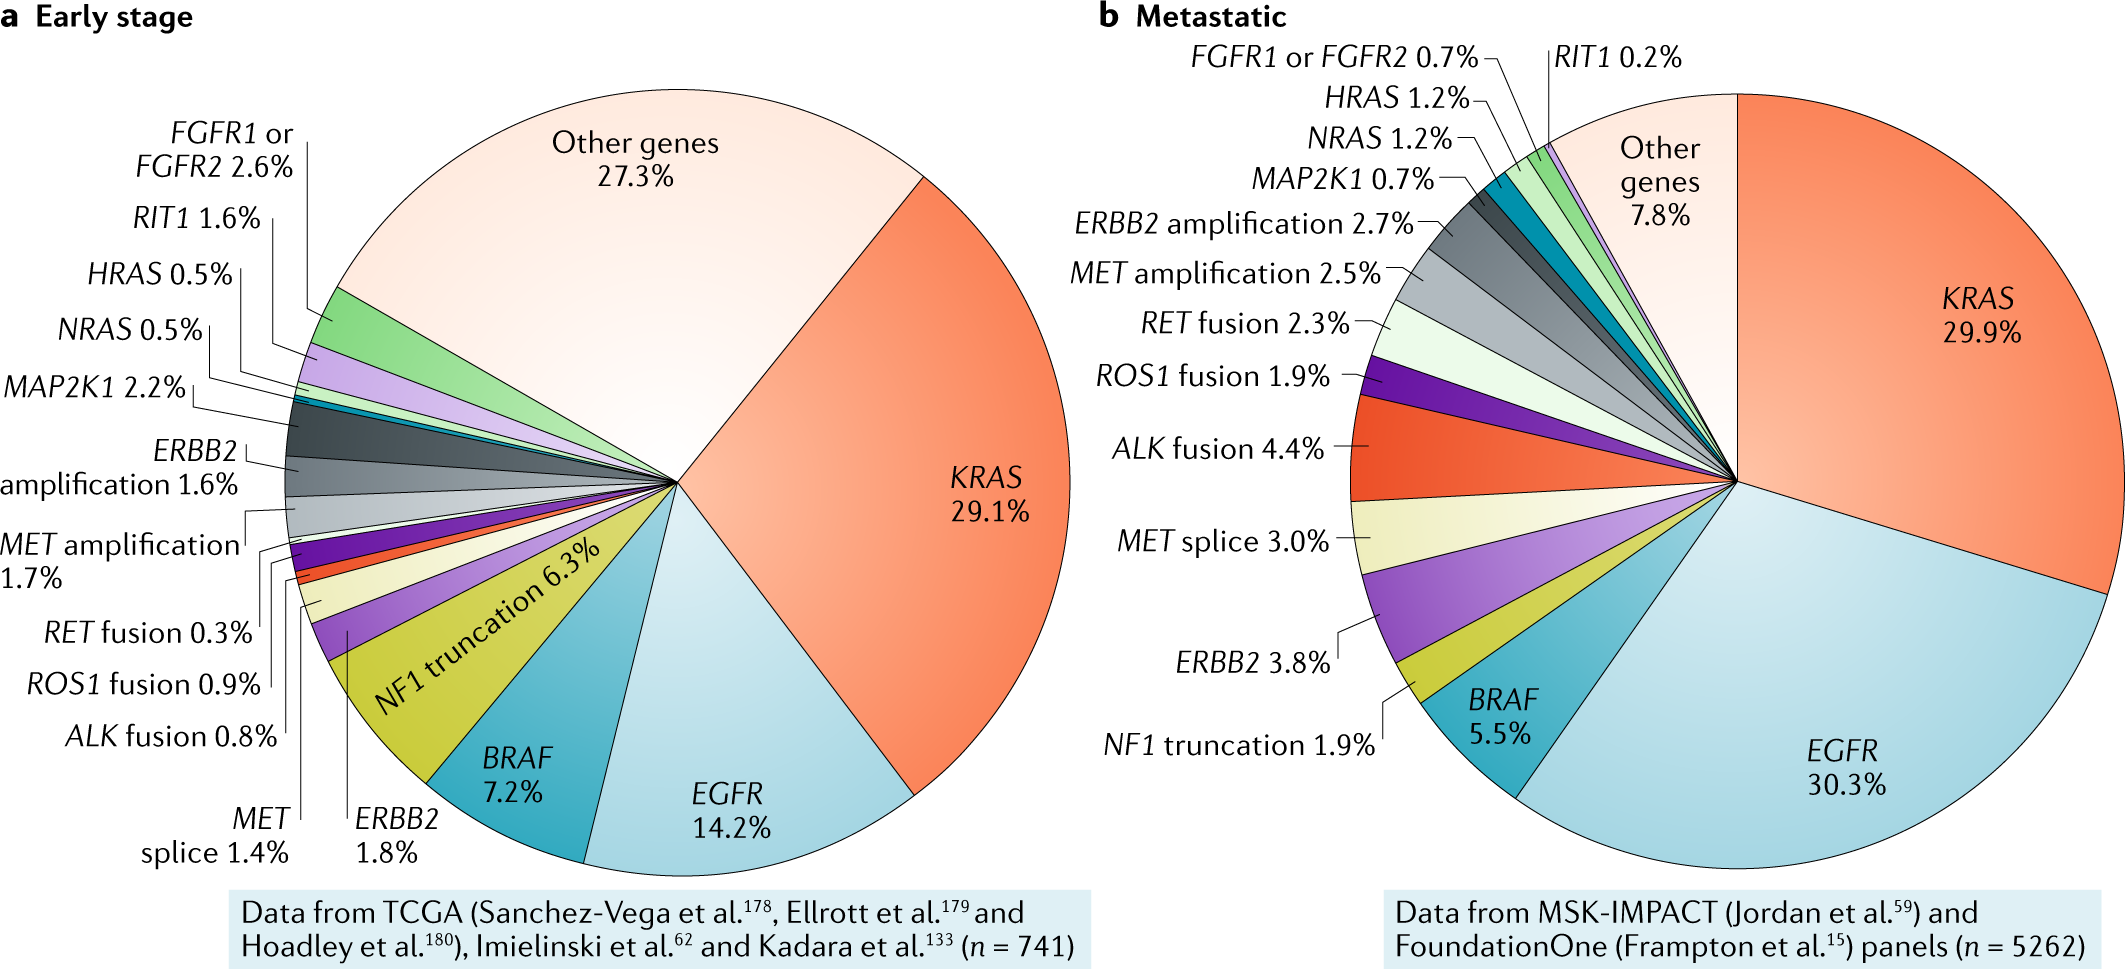 Co-occurring genomic alterations in non-small-cell lung cancer